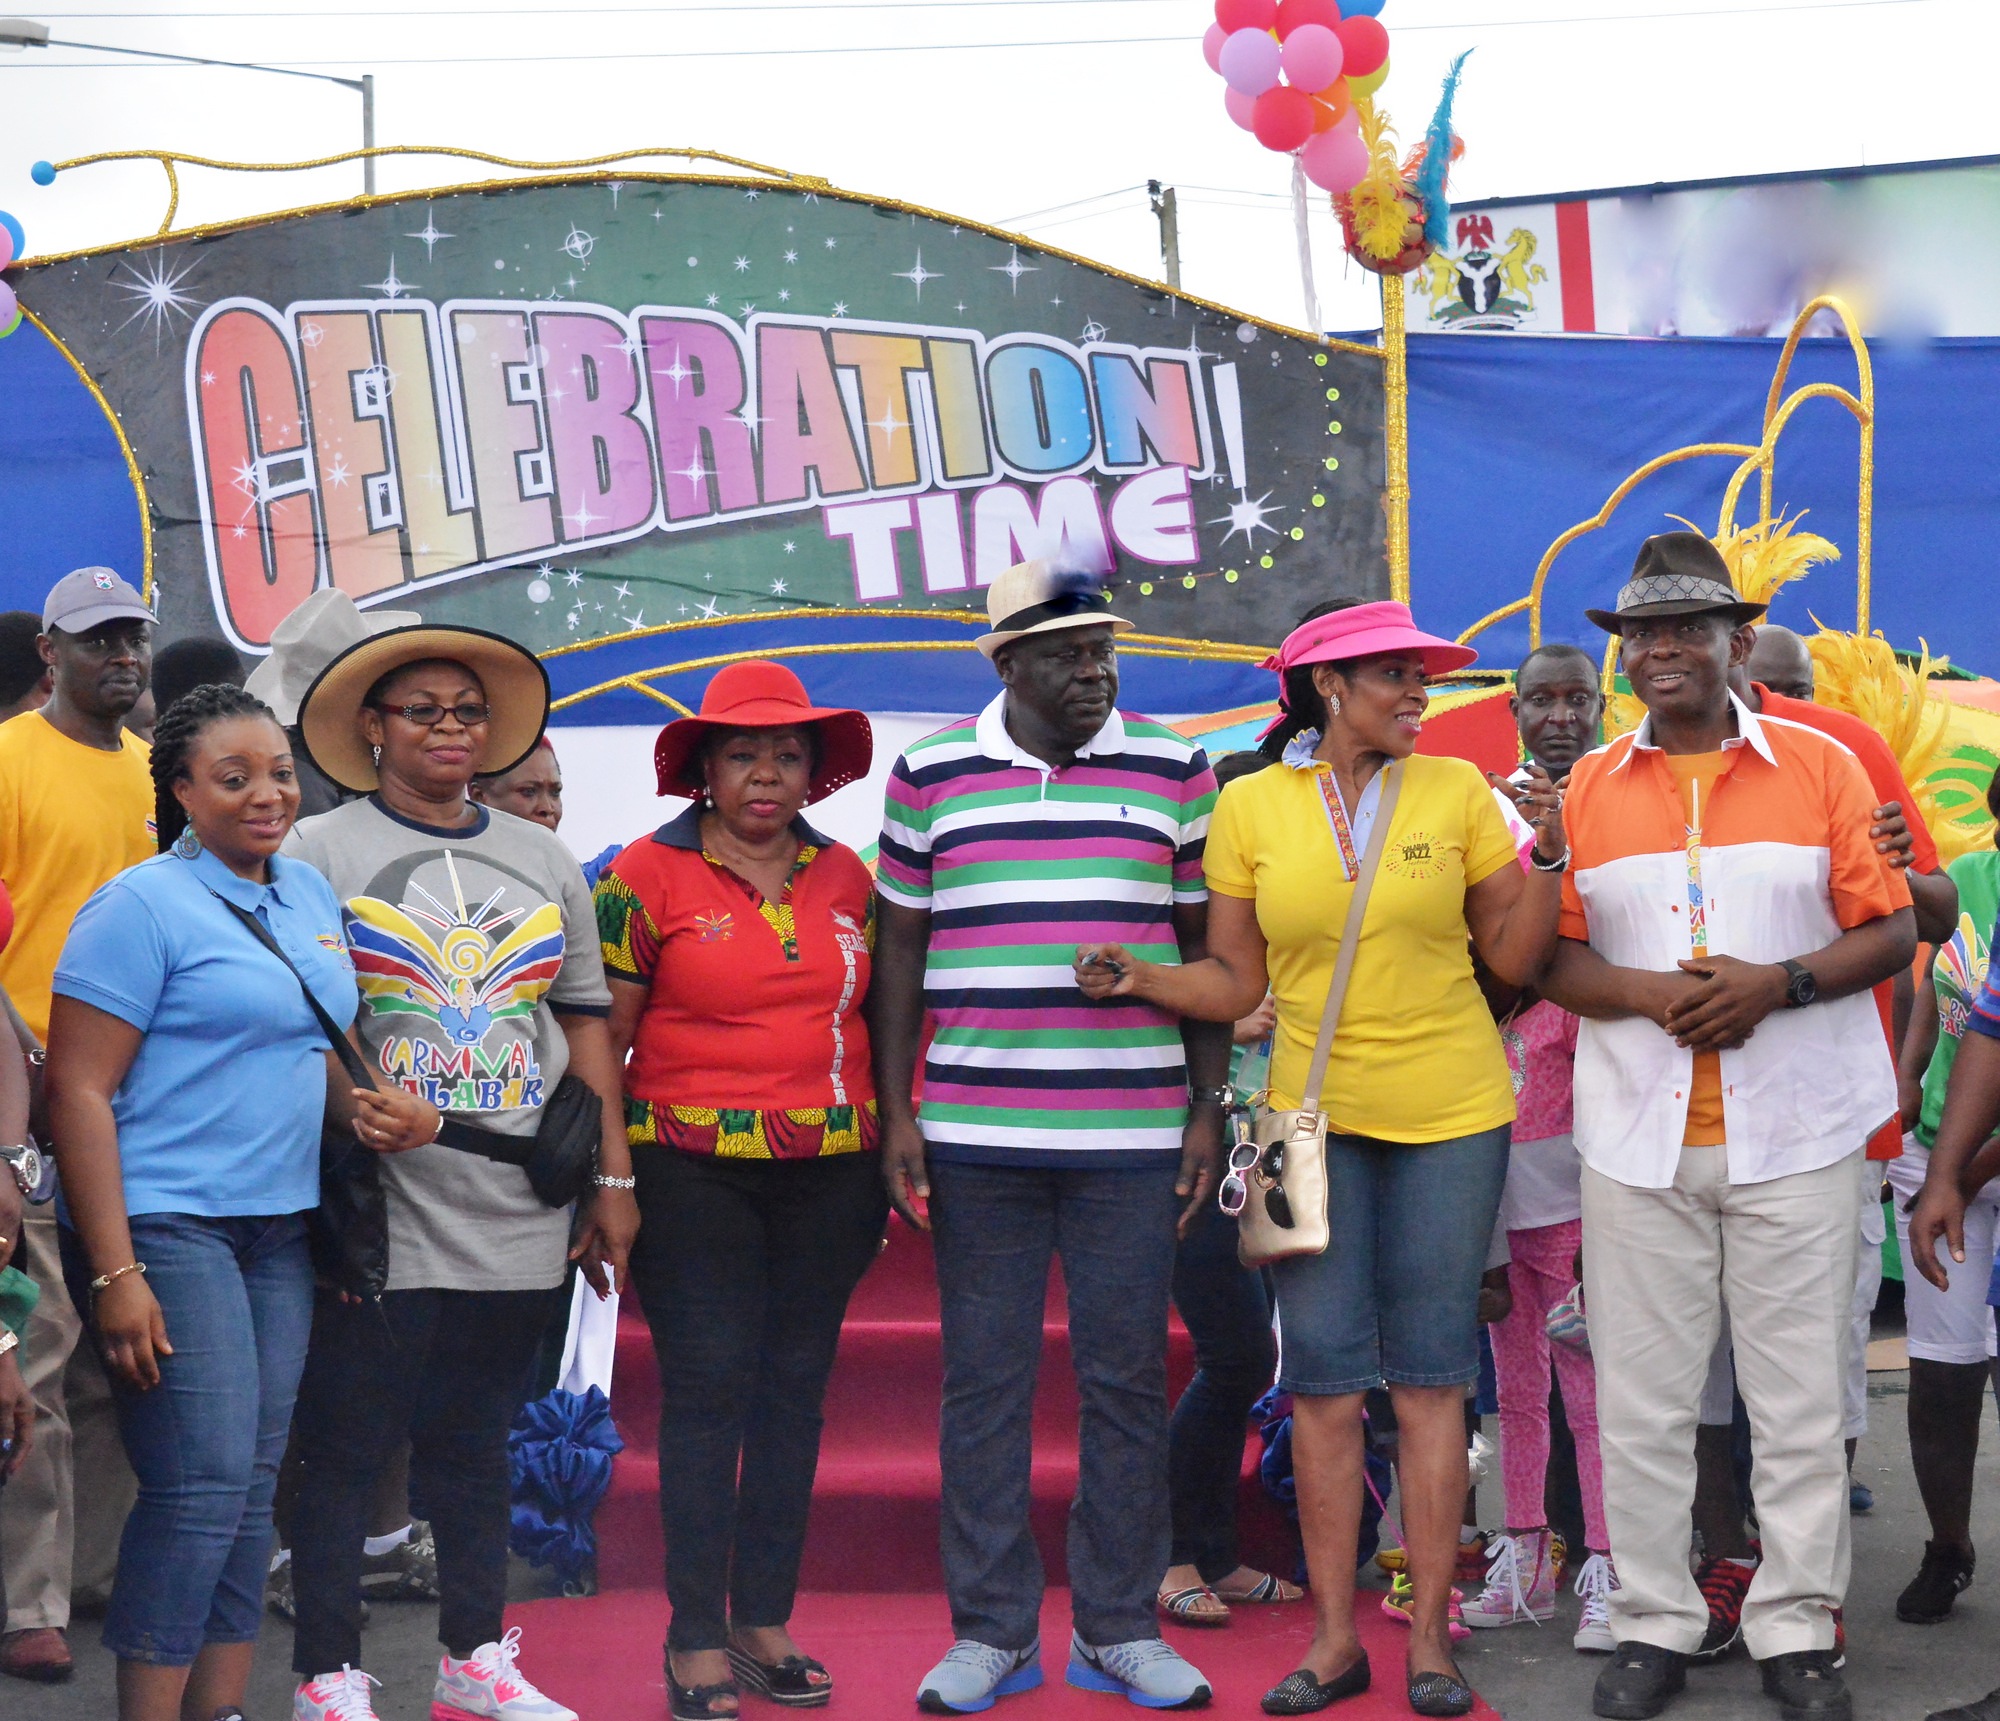 From left, Wife of the Speaker, Cross River State House of Assembly, Mrs. Eneyi Odey, Mrs Gloria Cobham, Sen. Ita Giwa, Dep Governor Mr. Efiok Cobham, Mrs Obioma Imoke and Mr. Gershom Bassey, shortly after unveiling the 2014 and 10th Edition of Carnival Calabar theme, "Celebration Time" in Calabar, today